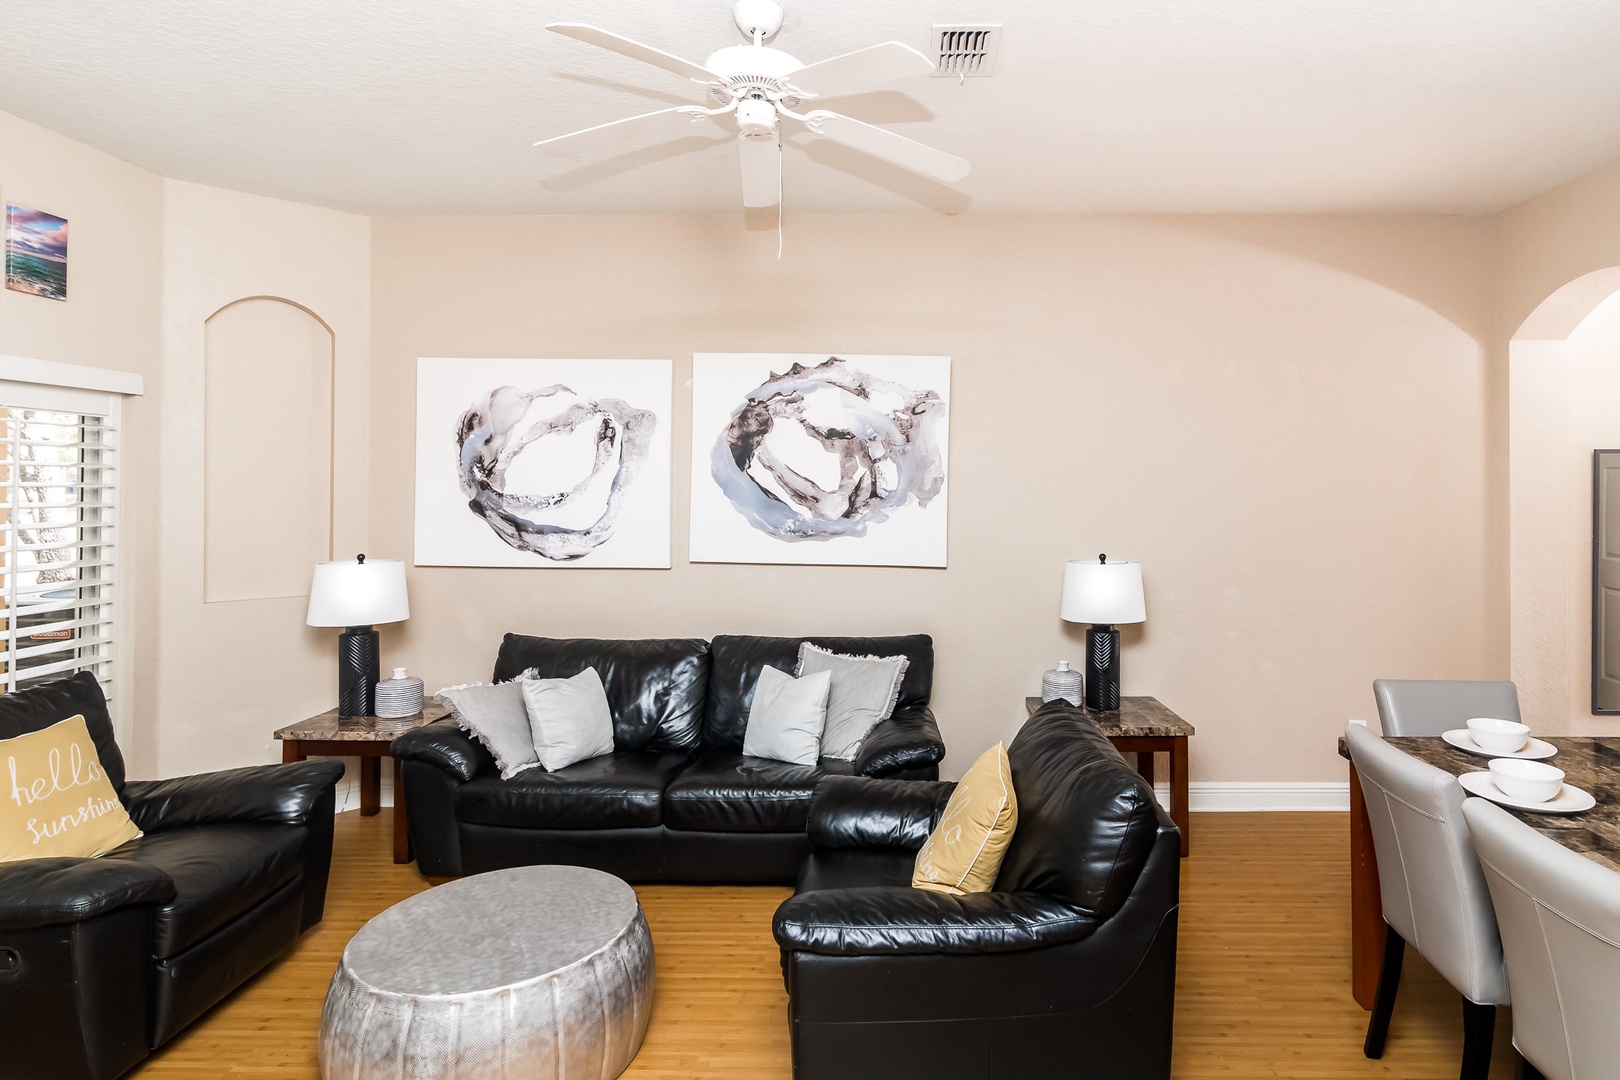 An open living space which features ample seating, cable TV, and access to the back patio